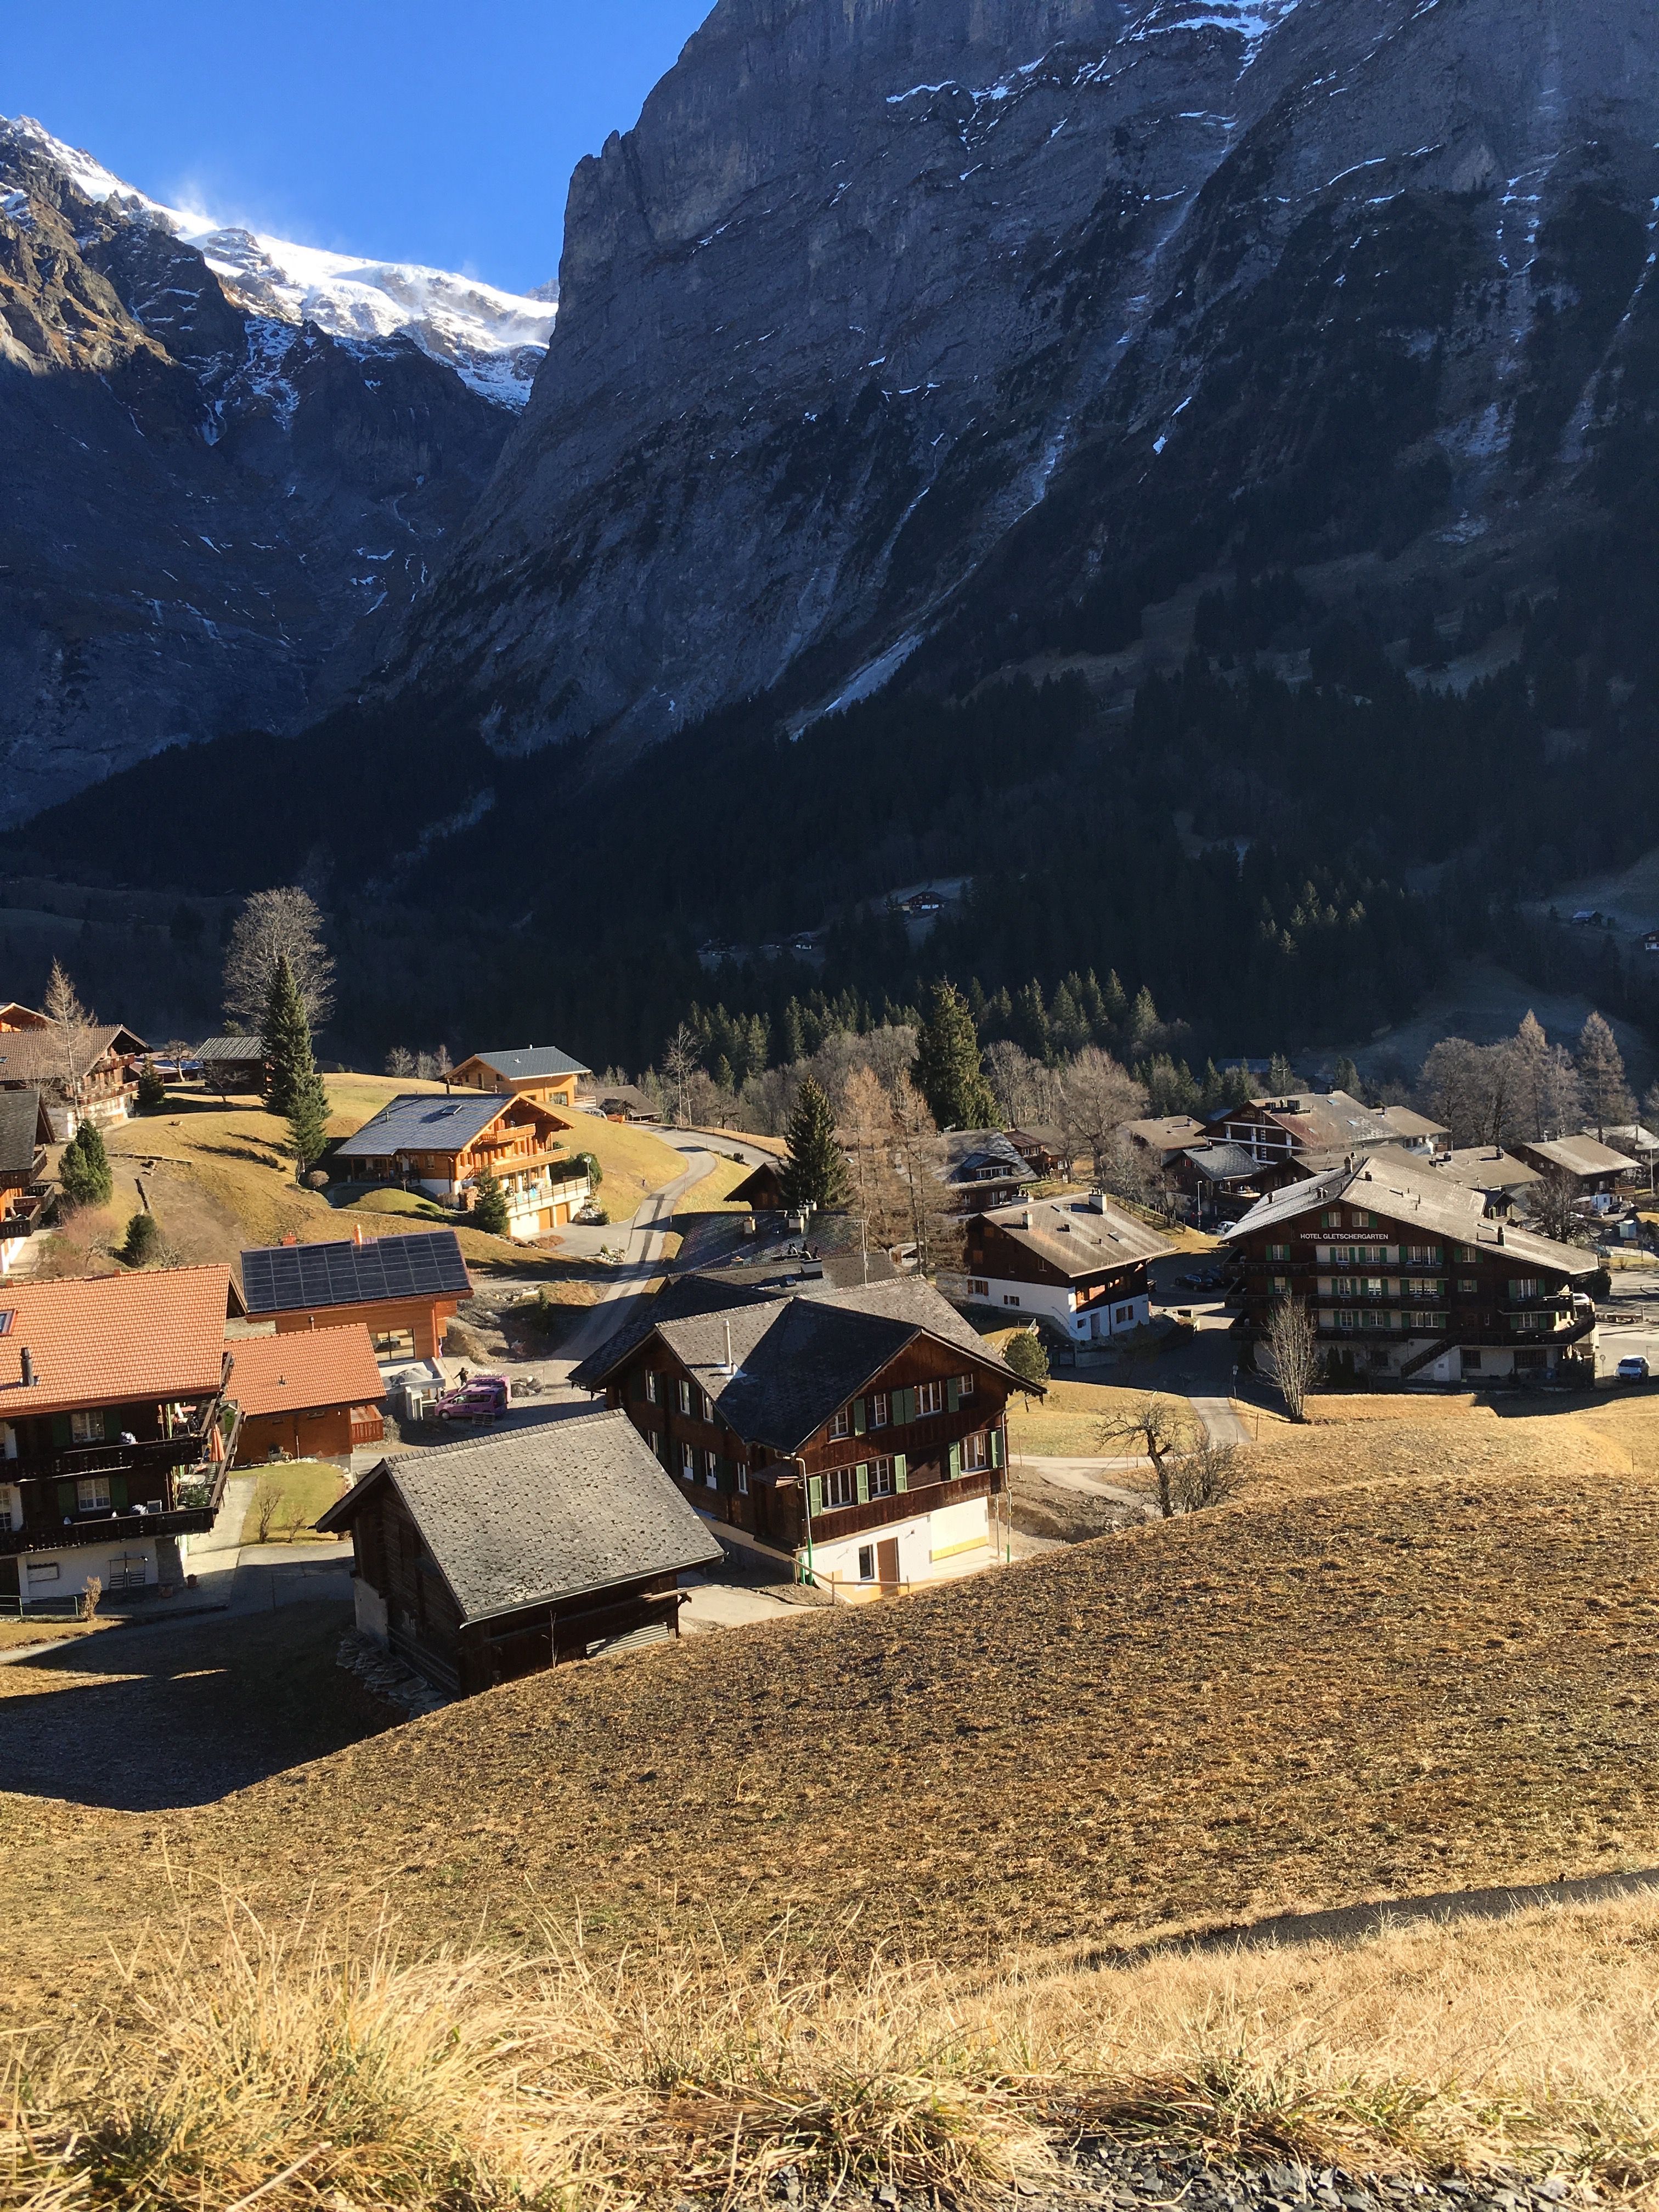 The most beautiful village in the world - Grindelwald